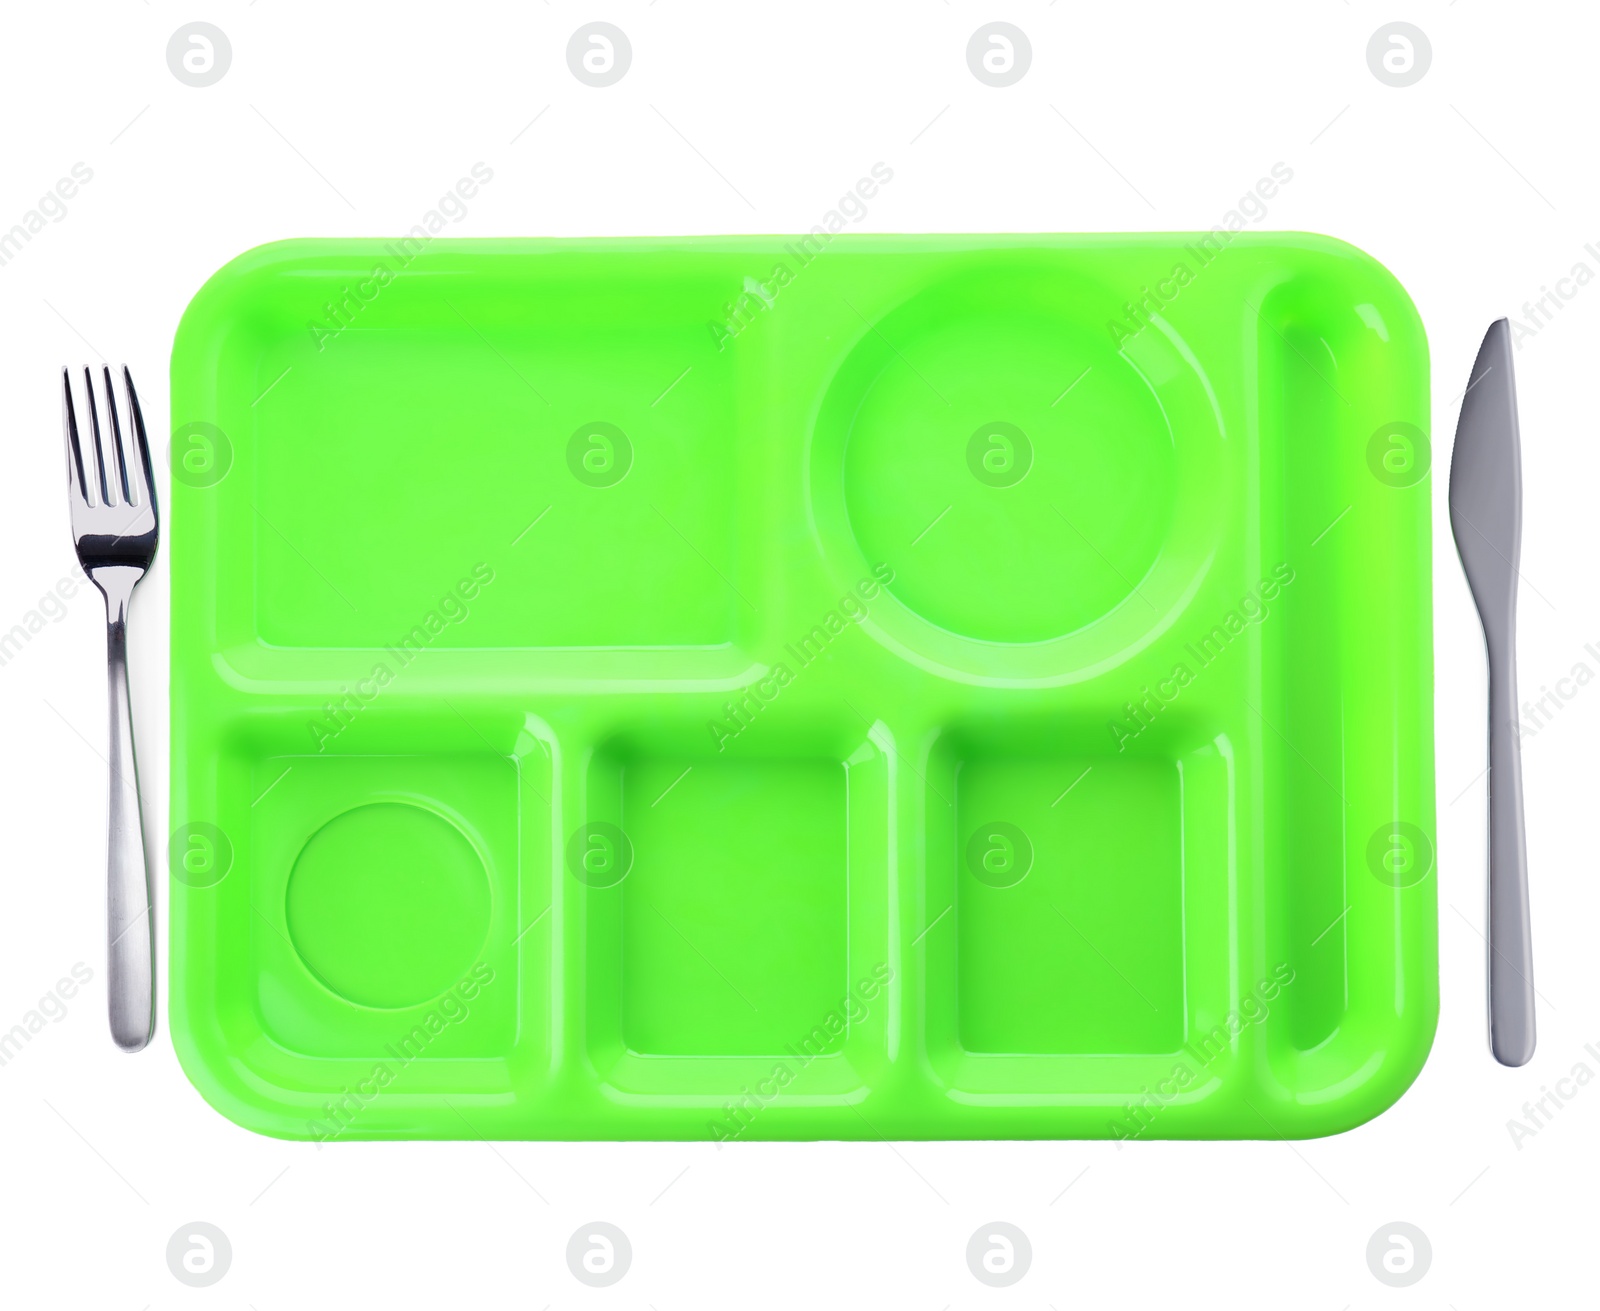 Photo of Empty plastic tray on white background, top view. School lunch